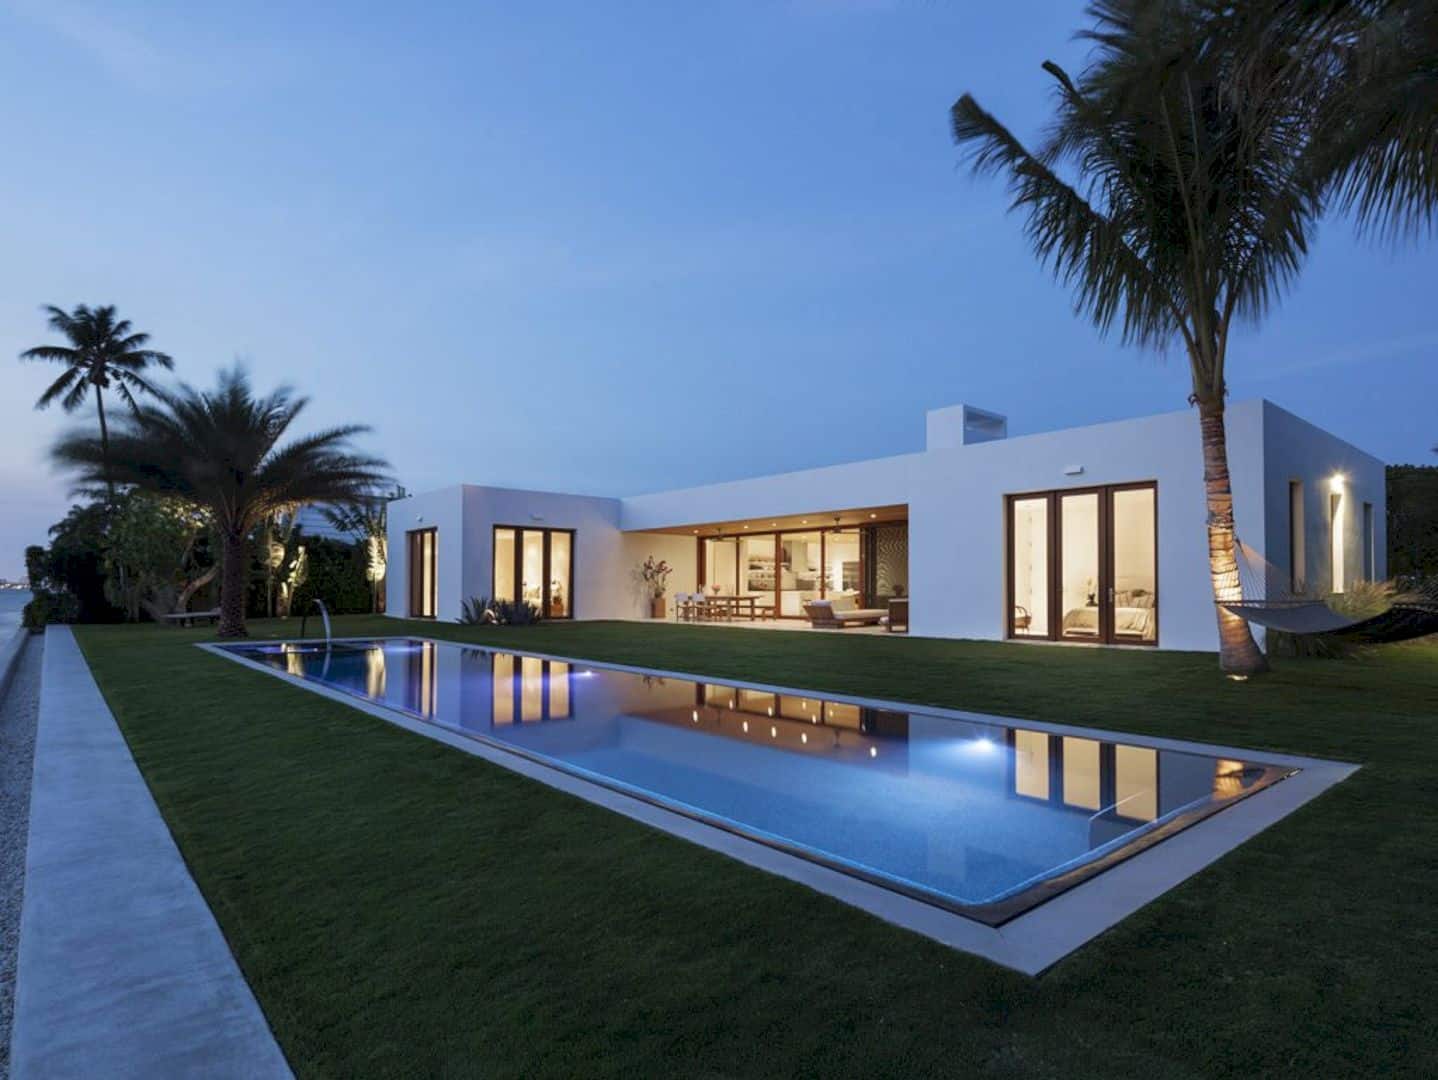 House In Florida A Single Family Residence In Casual Luxury Design And Modern Simplicity 5